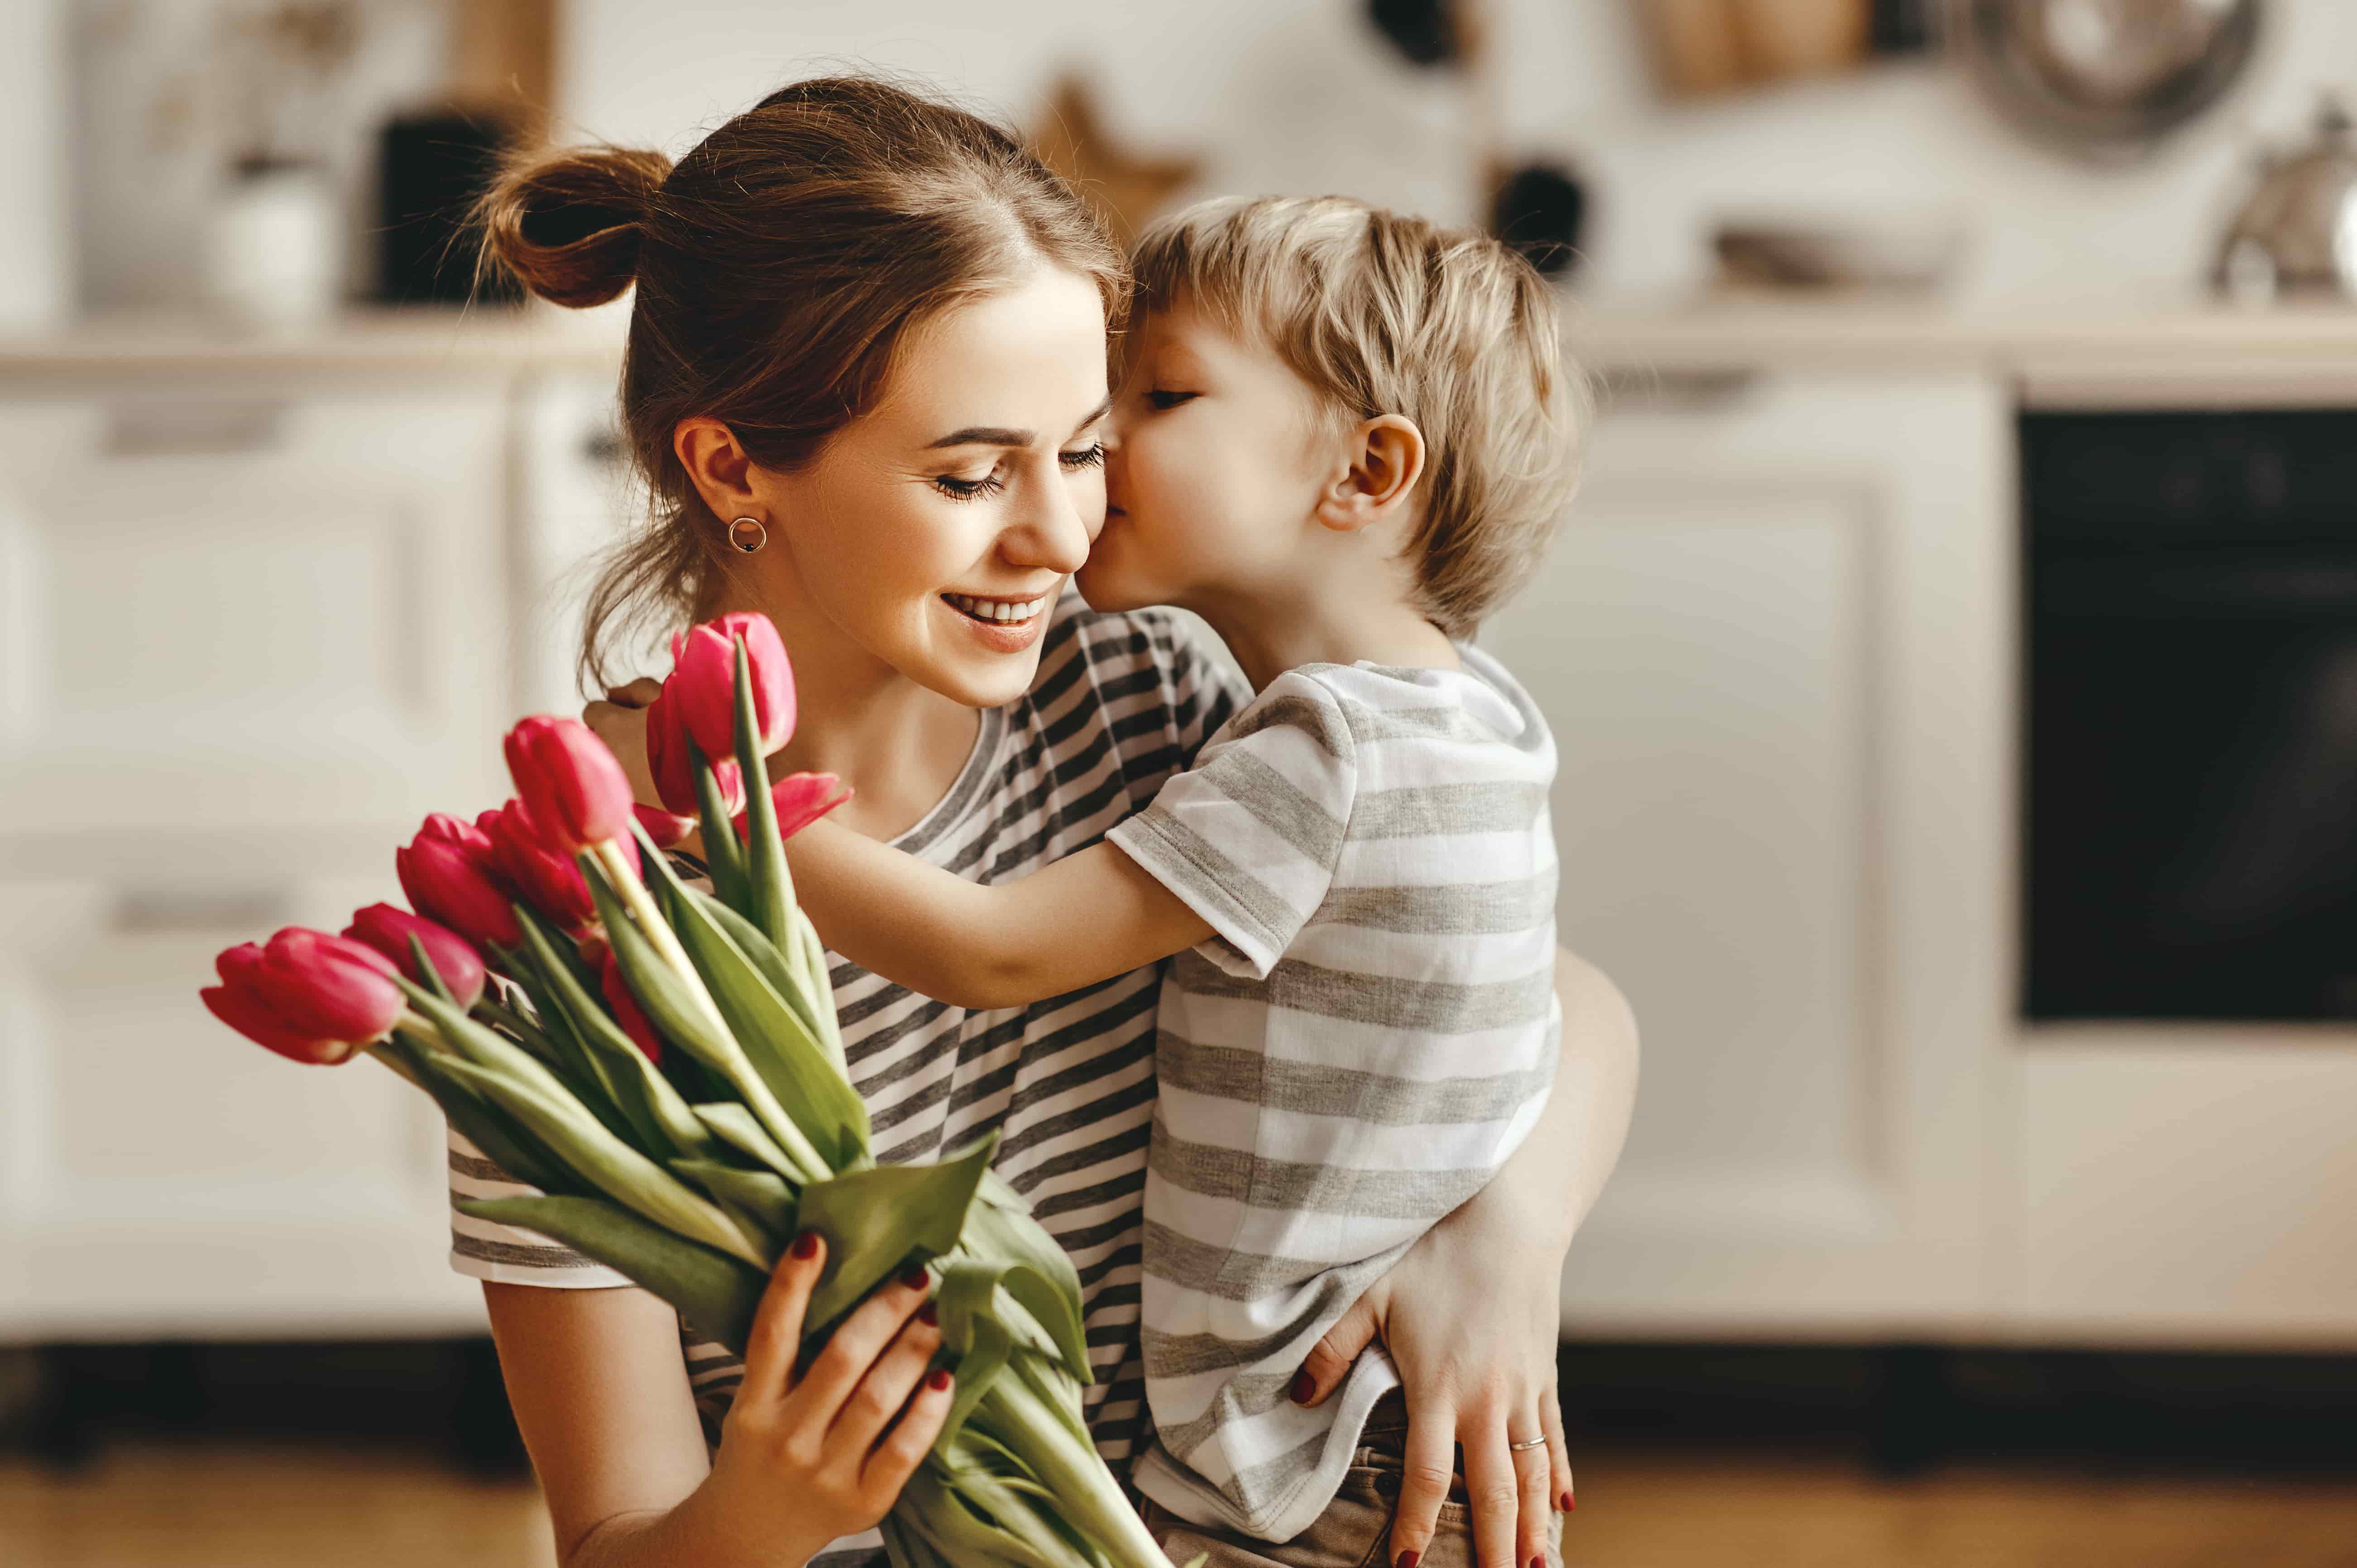 2021 Mothers Day Gift Ideas- 13 Things Mom Will ACTUALLY like!